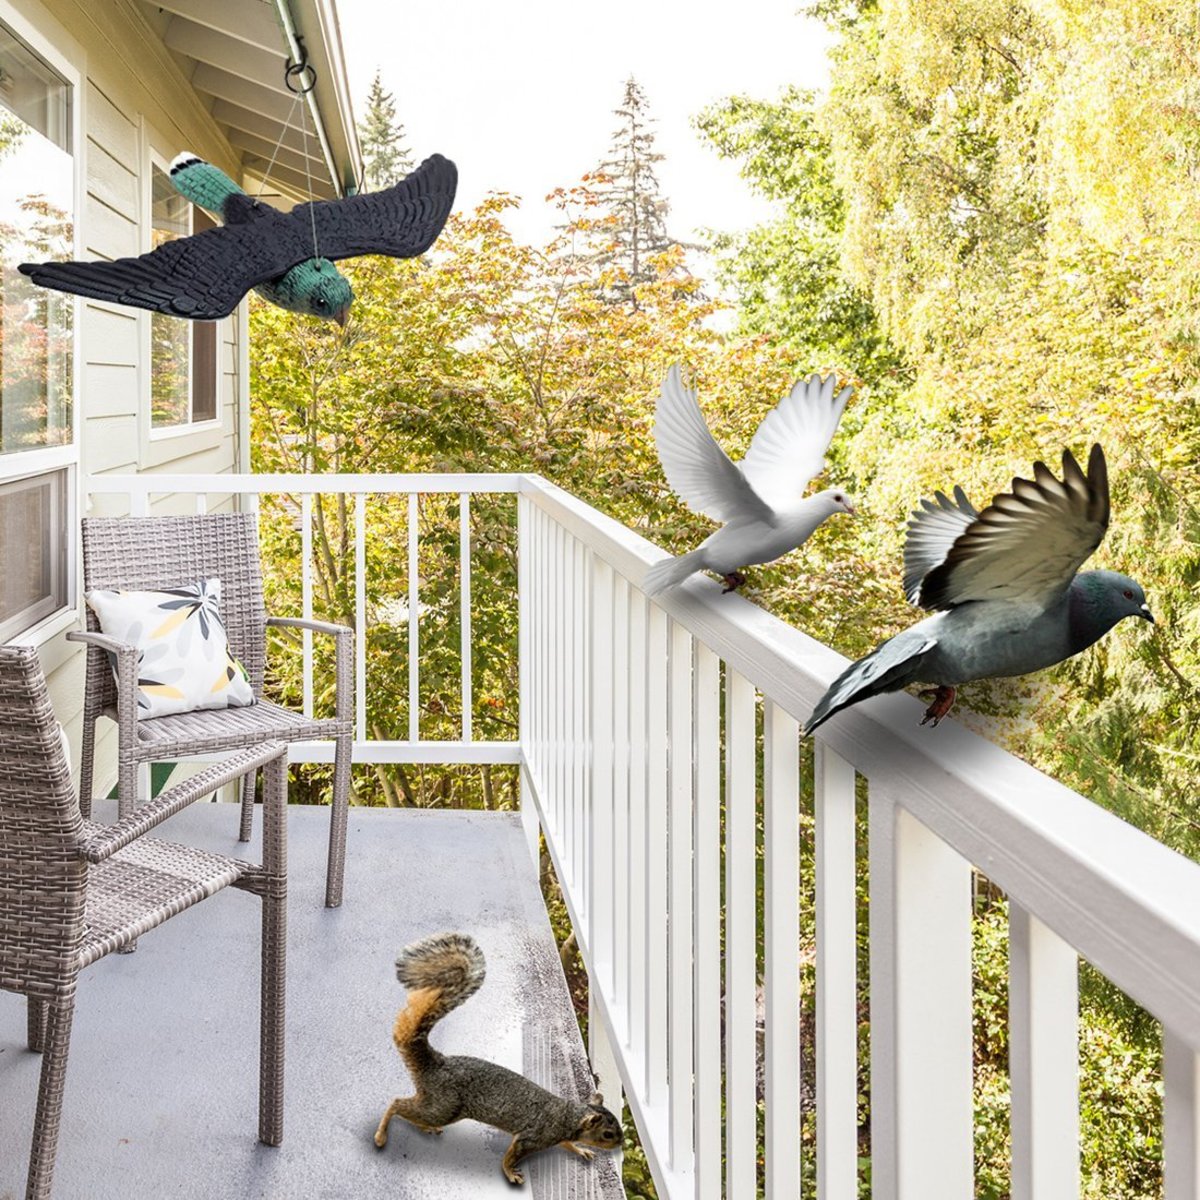 How To Keep Birds From Pooping On Patio Furniture